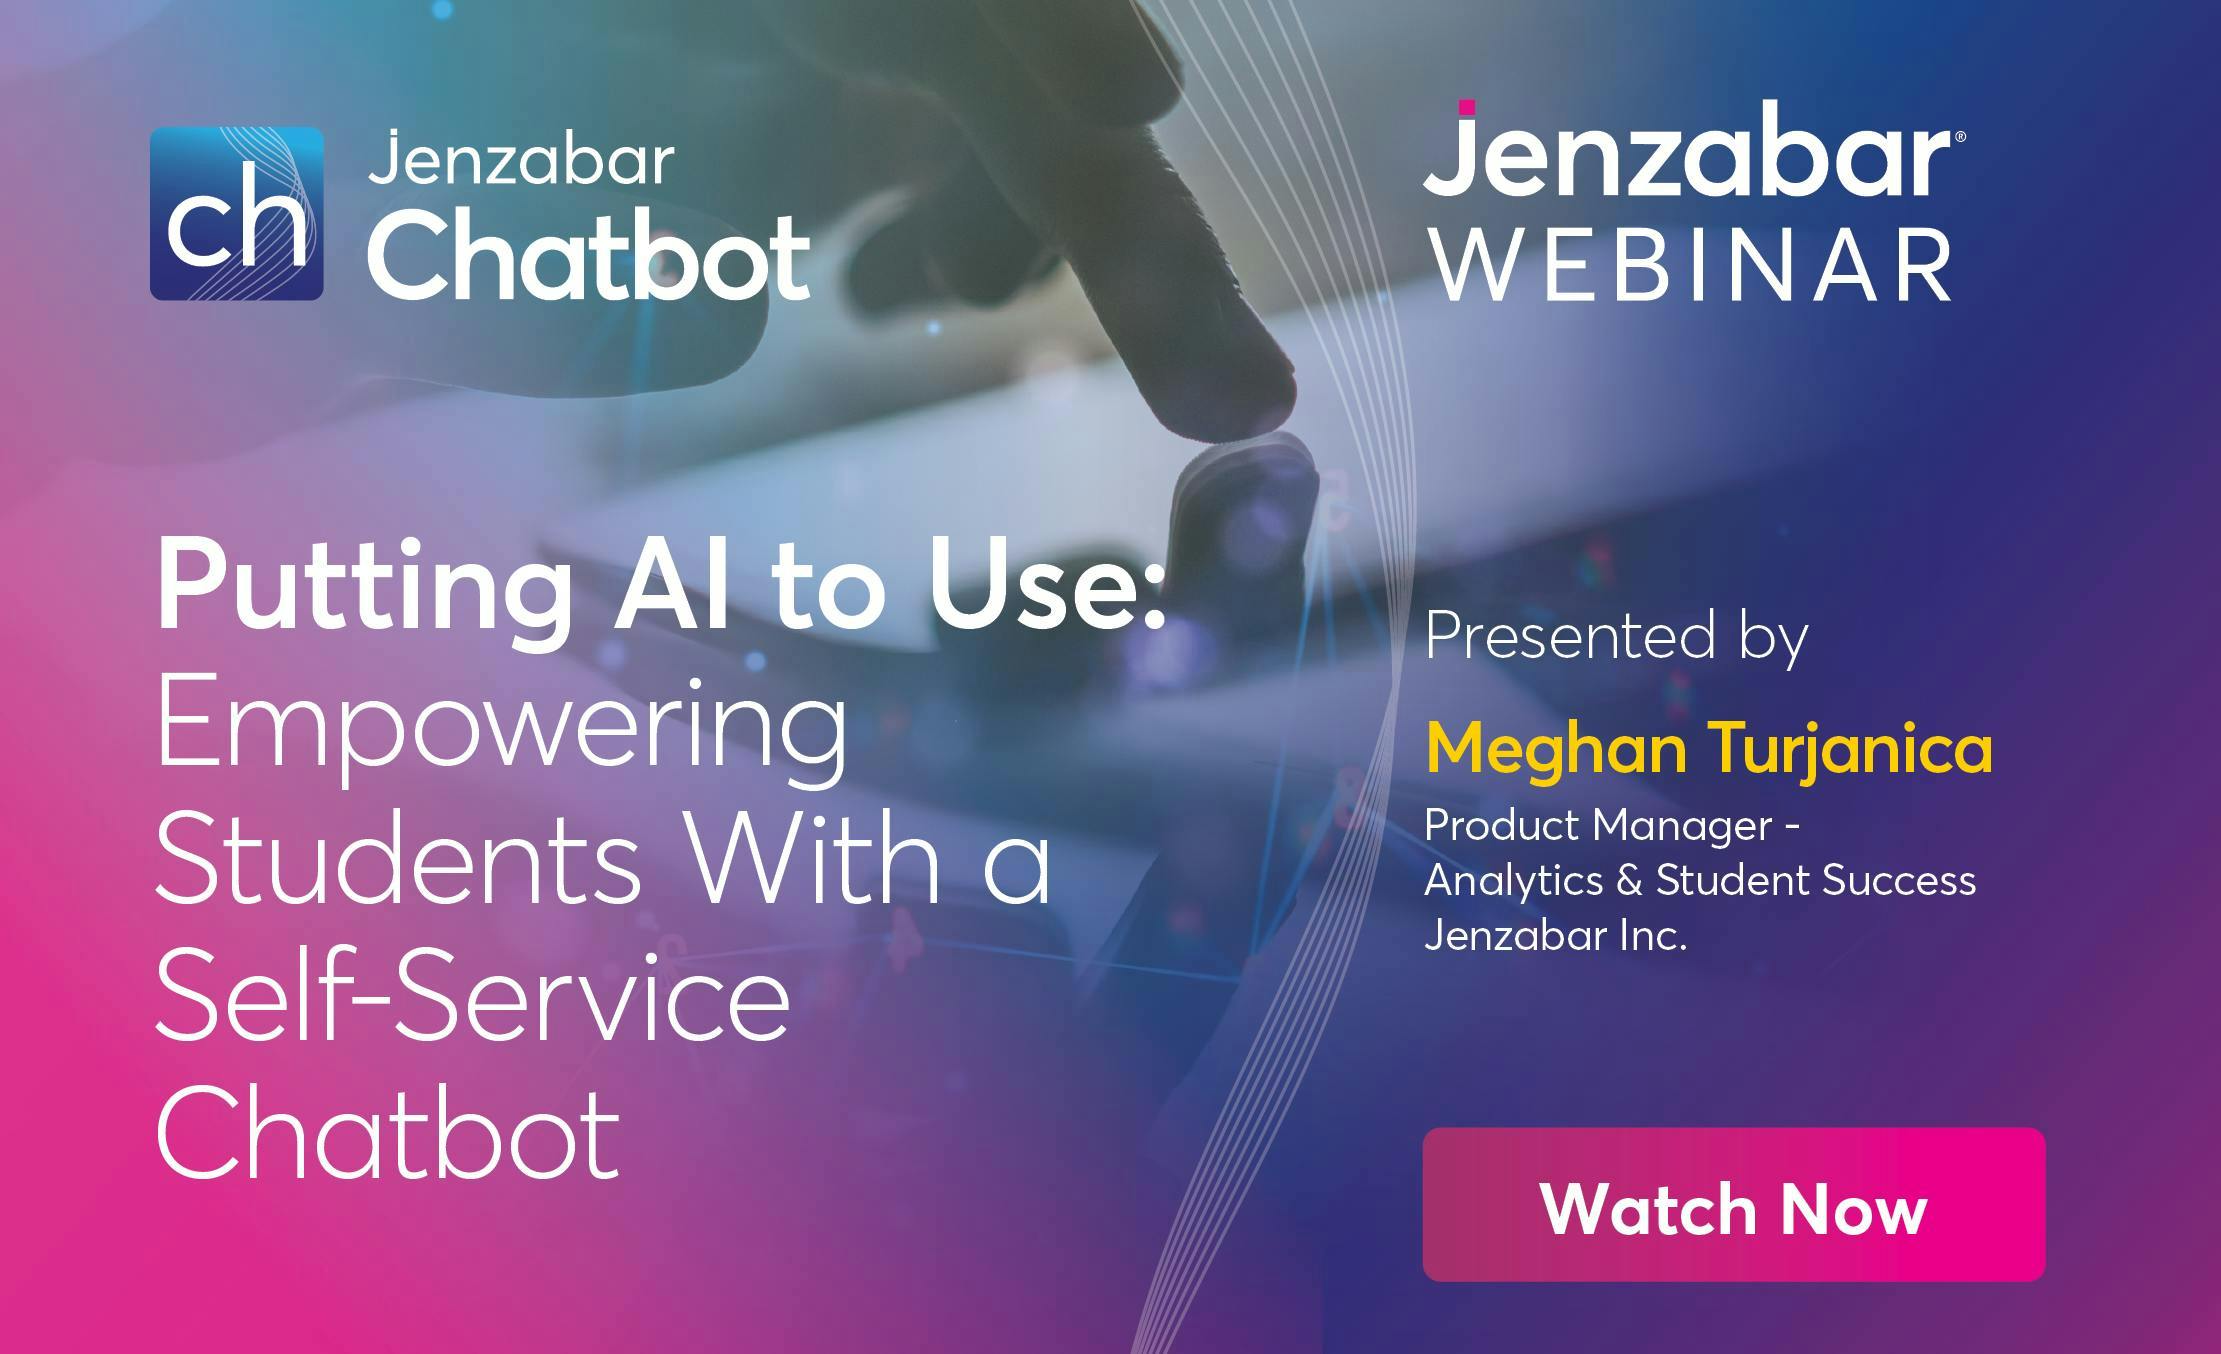 Webinar: Putting AI to Use: Empowering Students With a Self-Service Chatbot